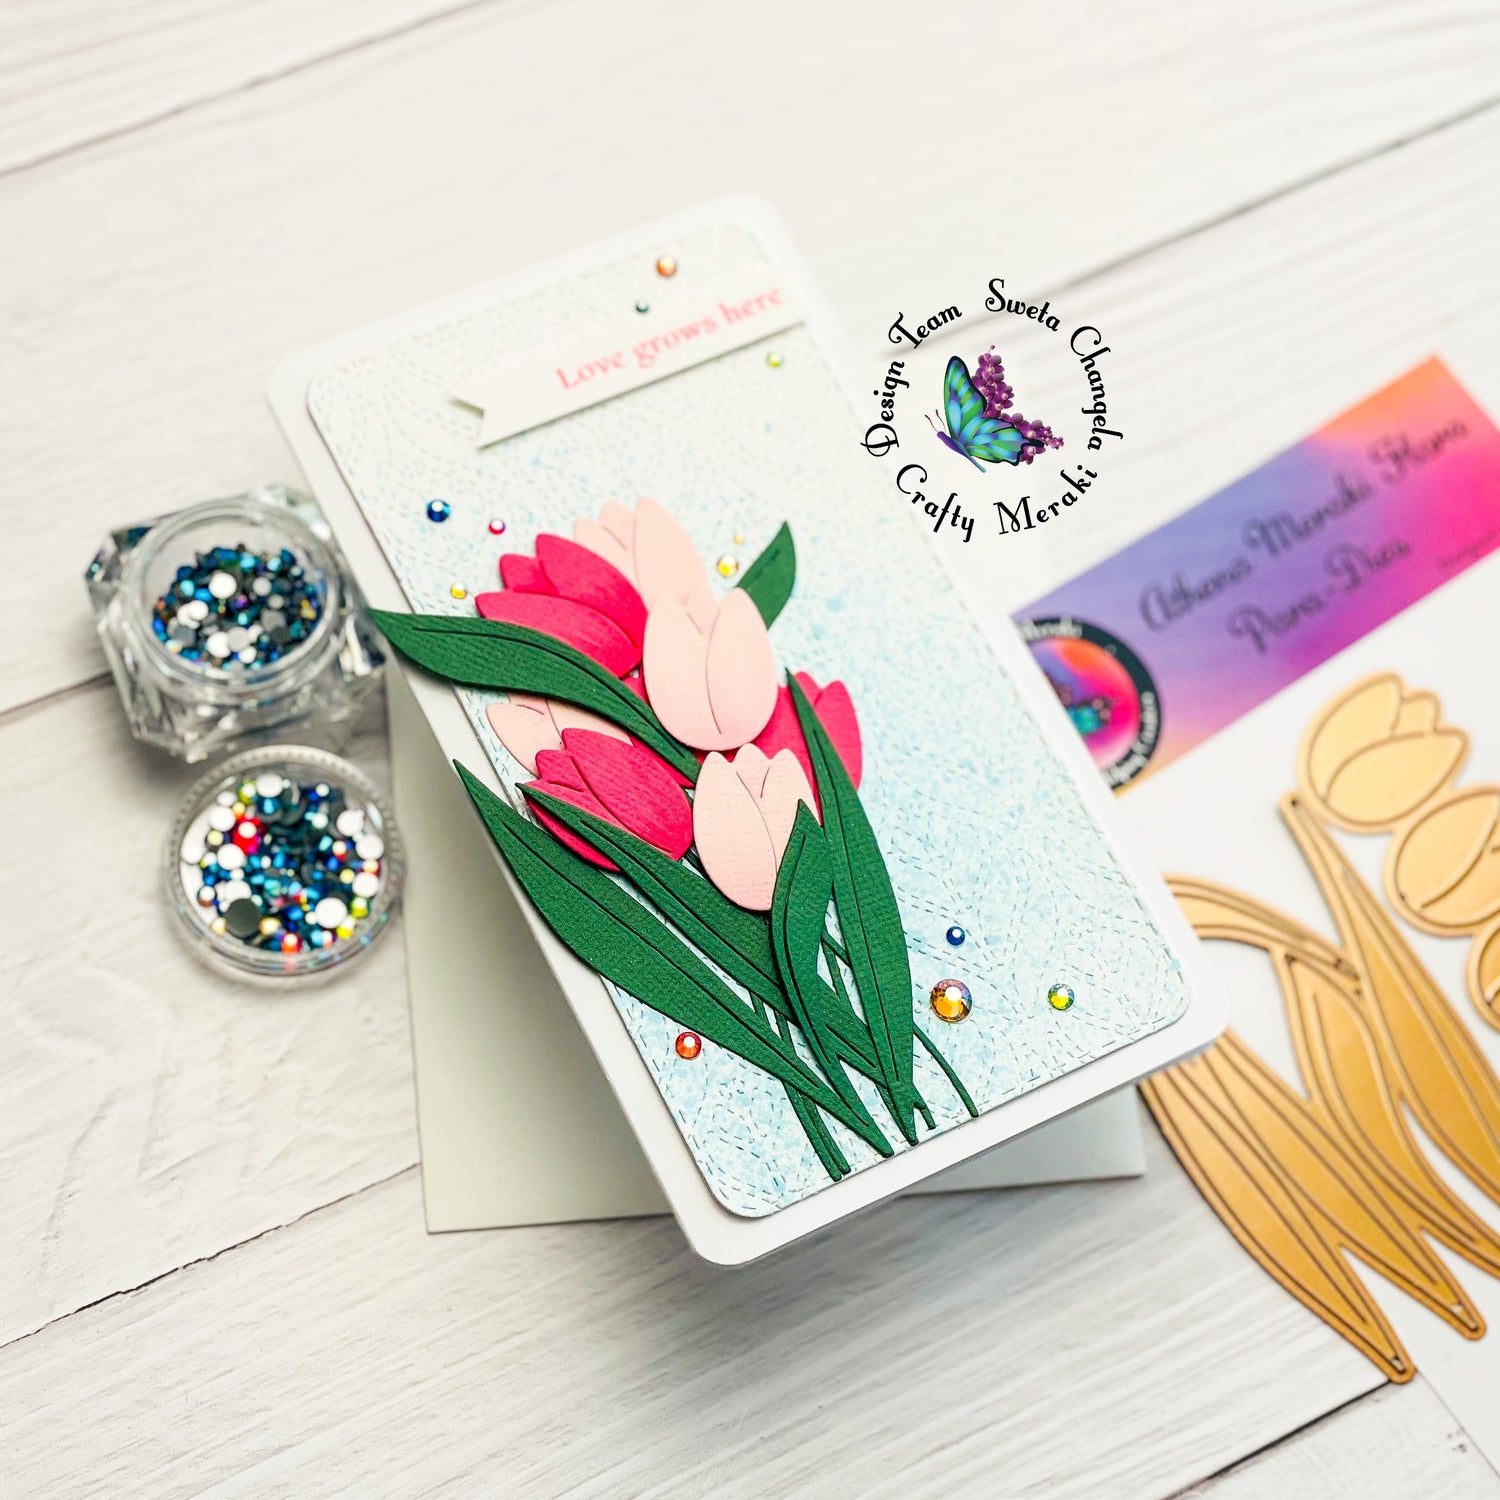 Quick April floral card by Sweta